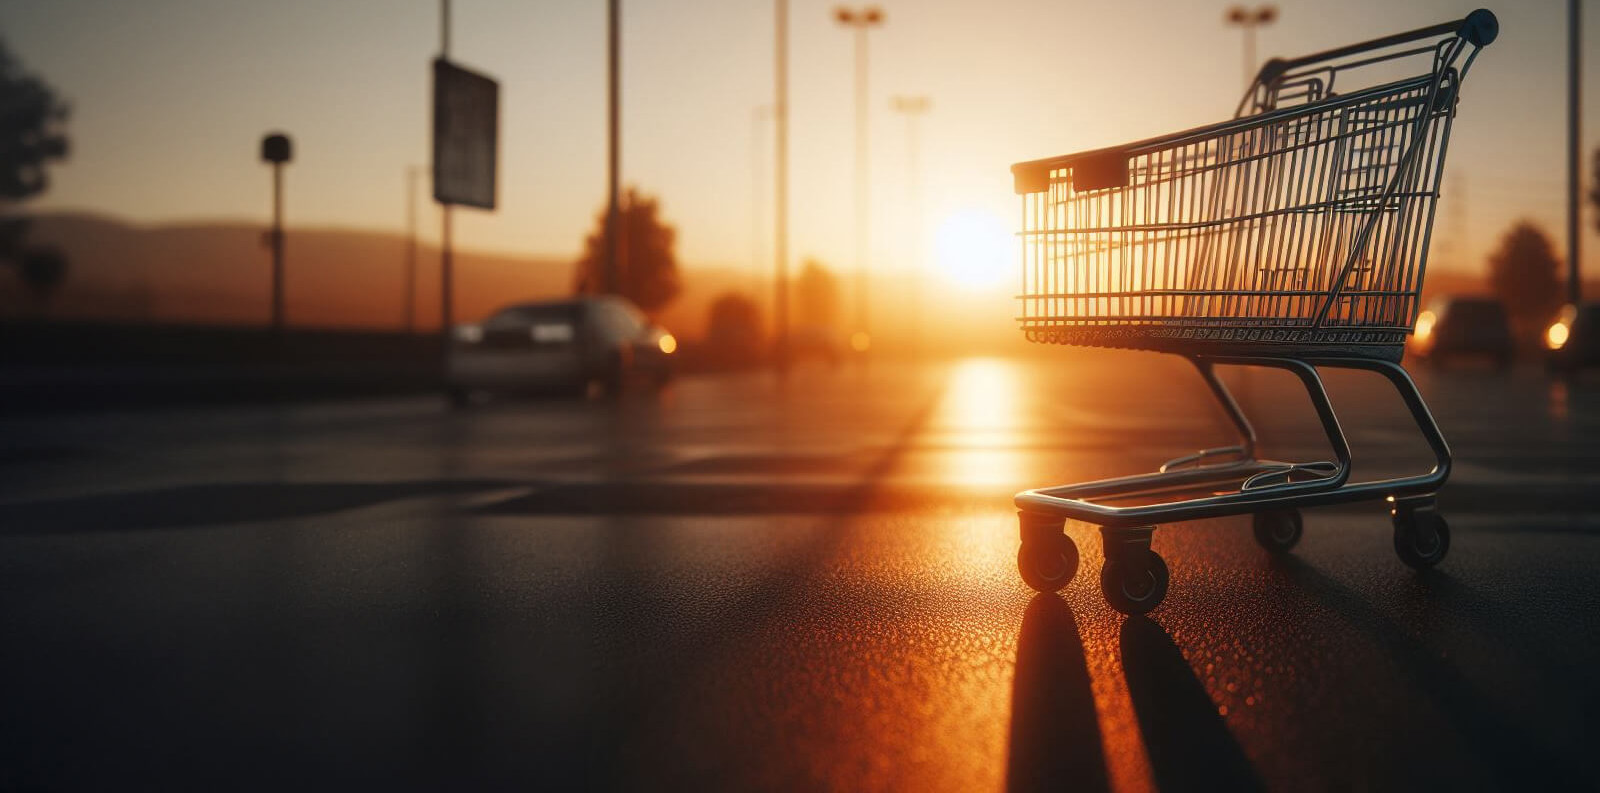 Observing Shopping Cart Behavior: A Reflection on Character and Success